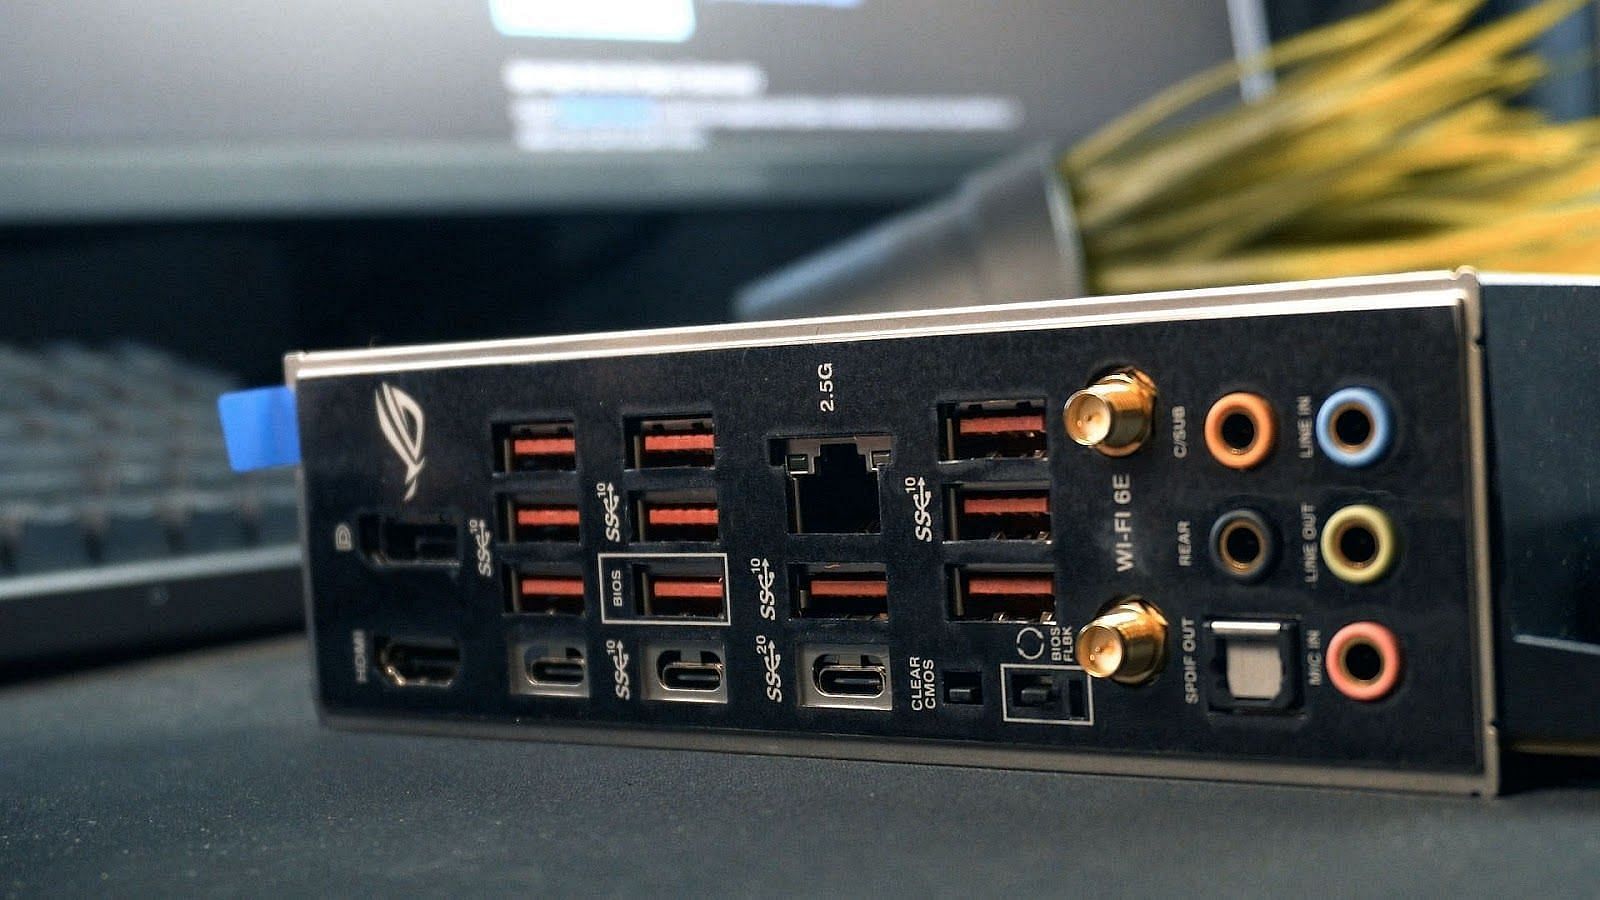 The plush rear I/O cover of the ASUS motherboard (Image via Sportskeeda)